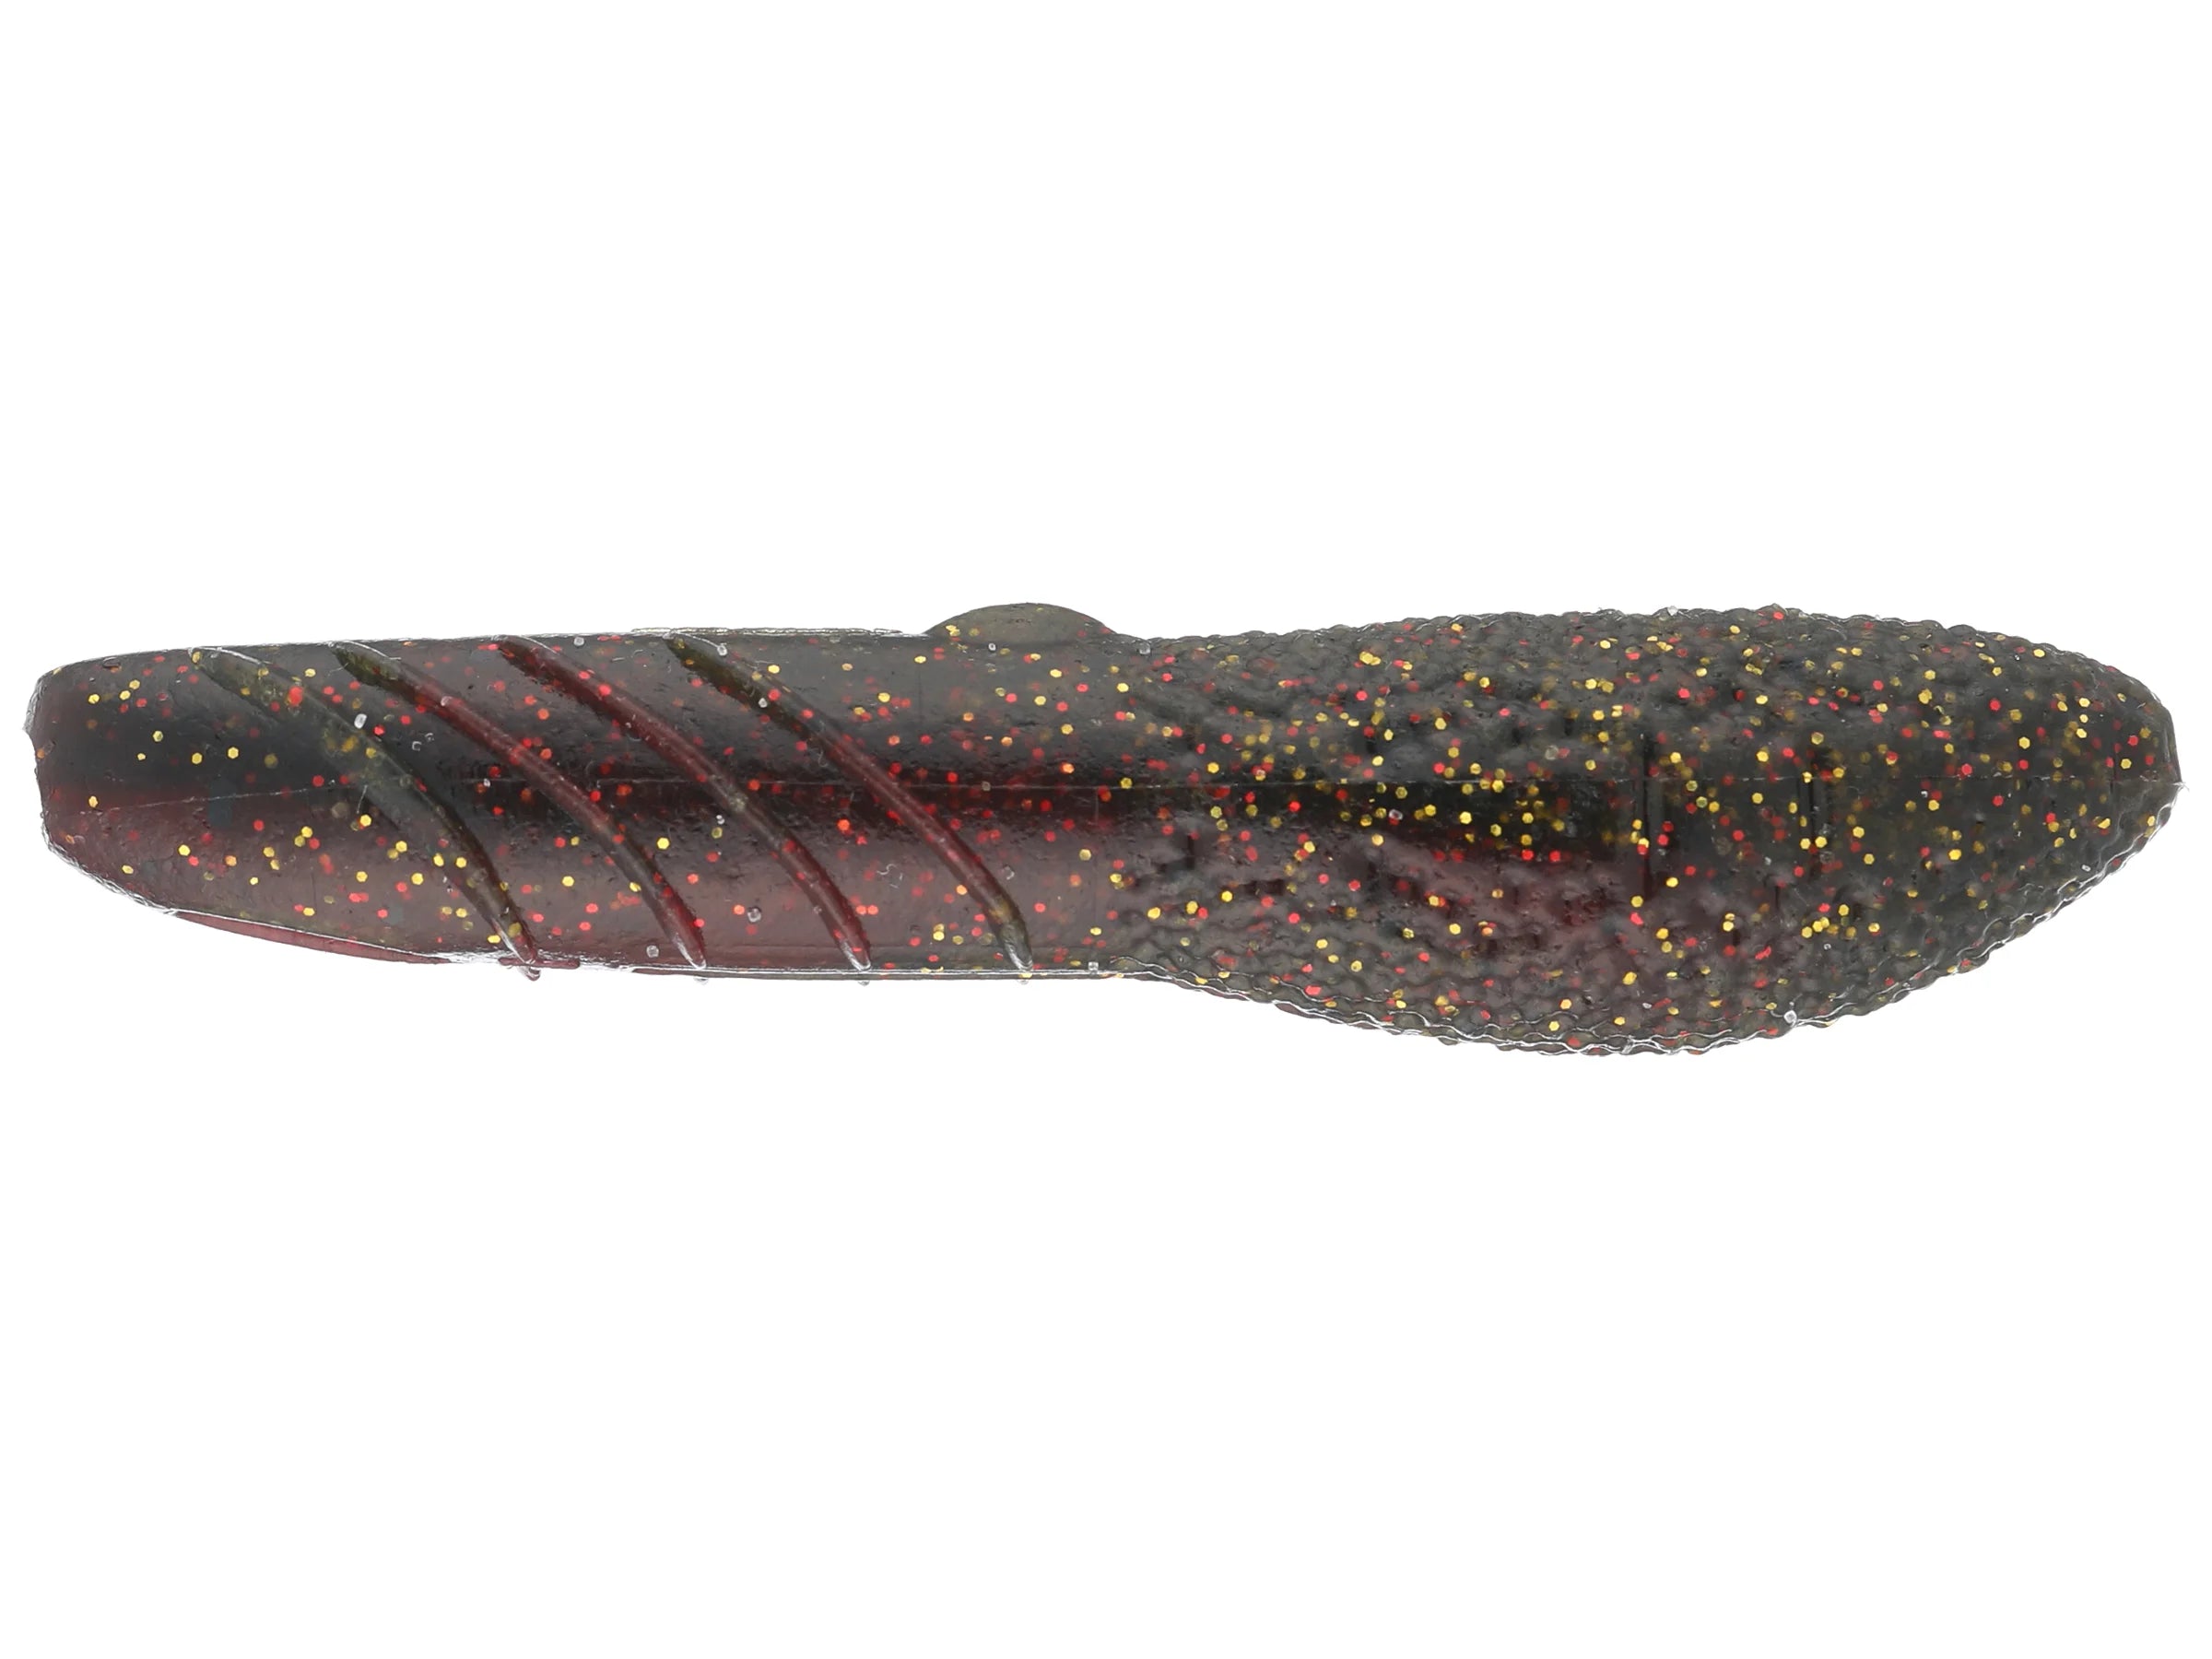 Buy aa04-falcon-lake-craw DEPS COVER SCAT